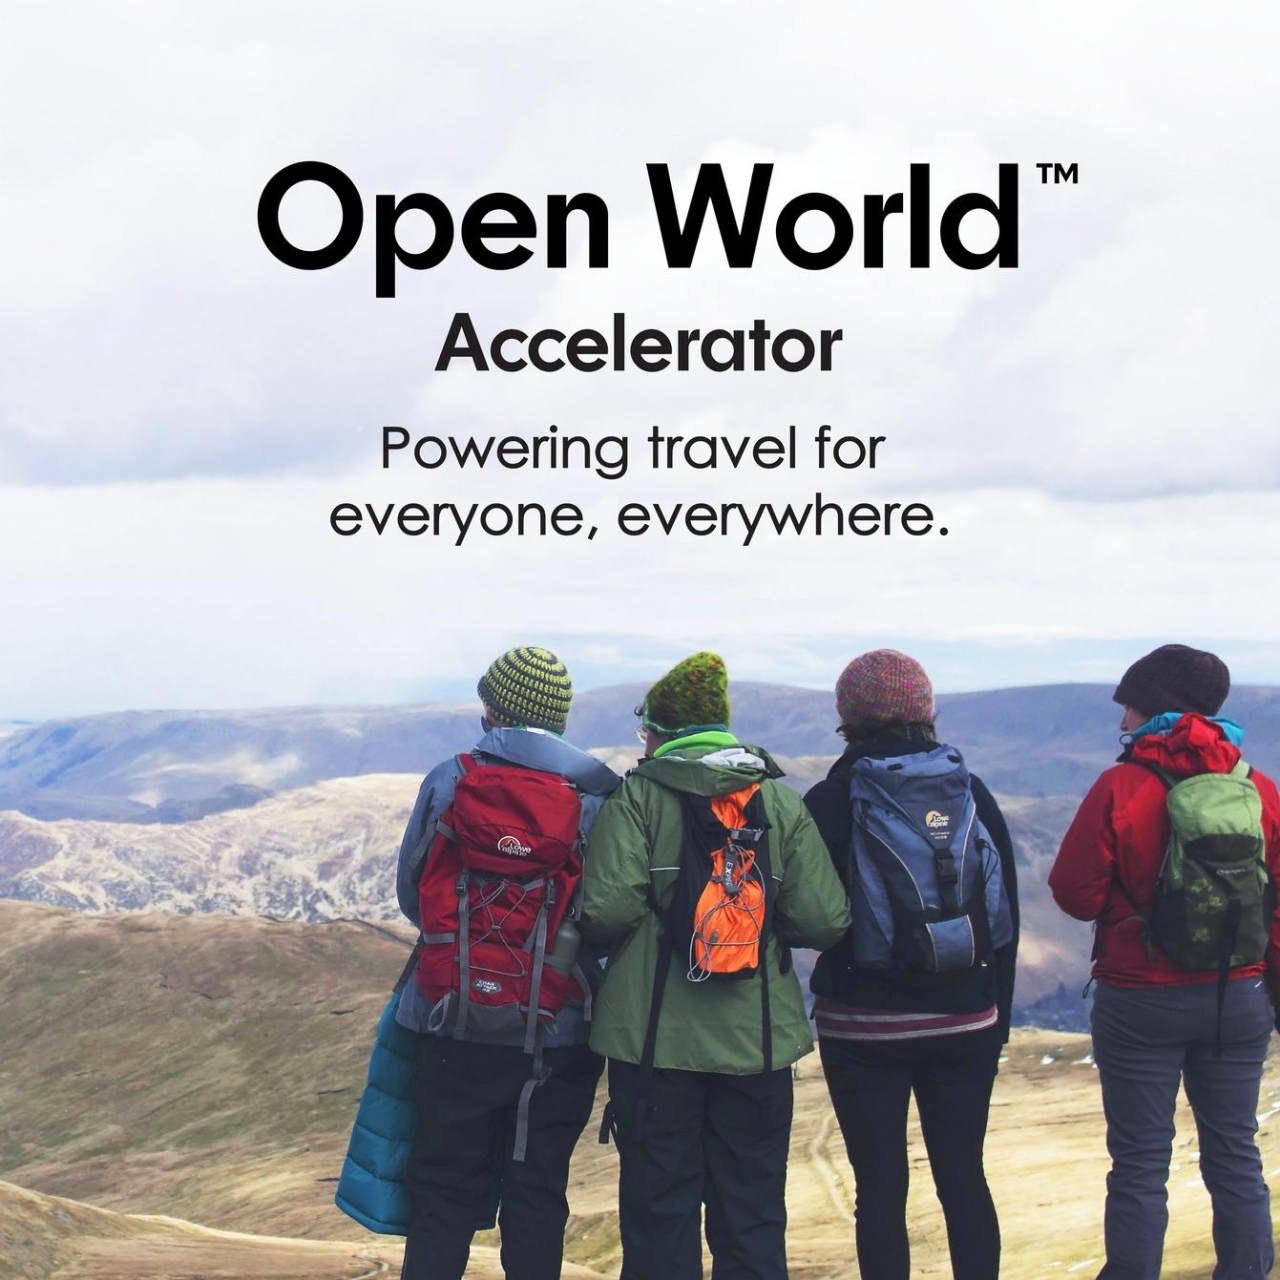 Four people in hiking gear looking at a panoramic view. "Open World Accelerator Powering travel for everyone, everywhere."